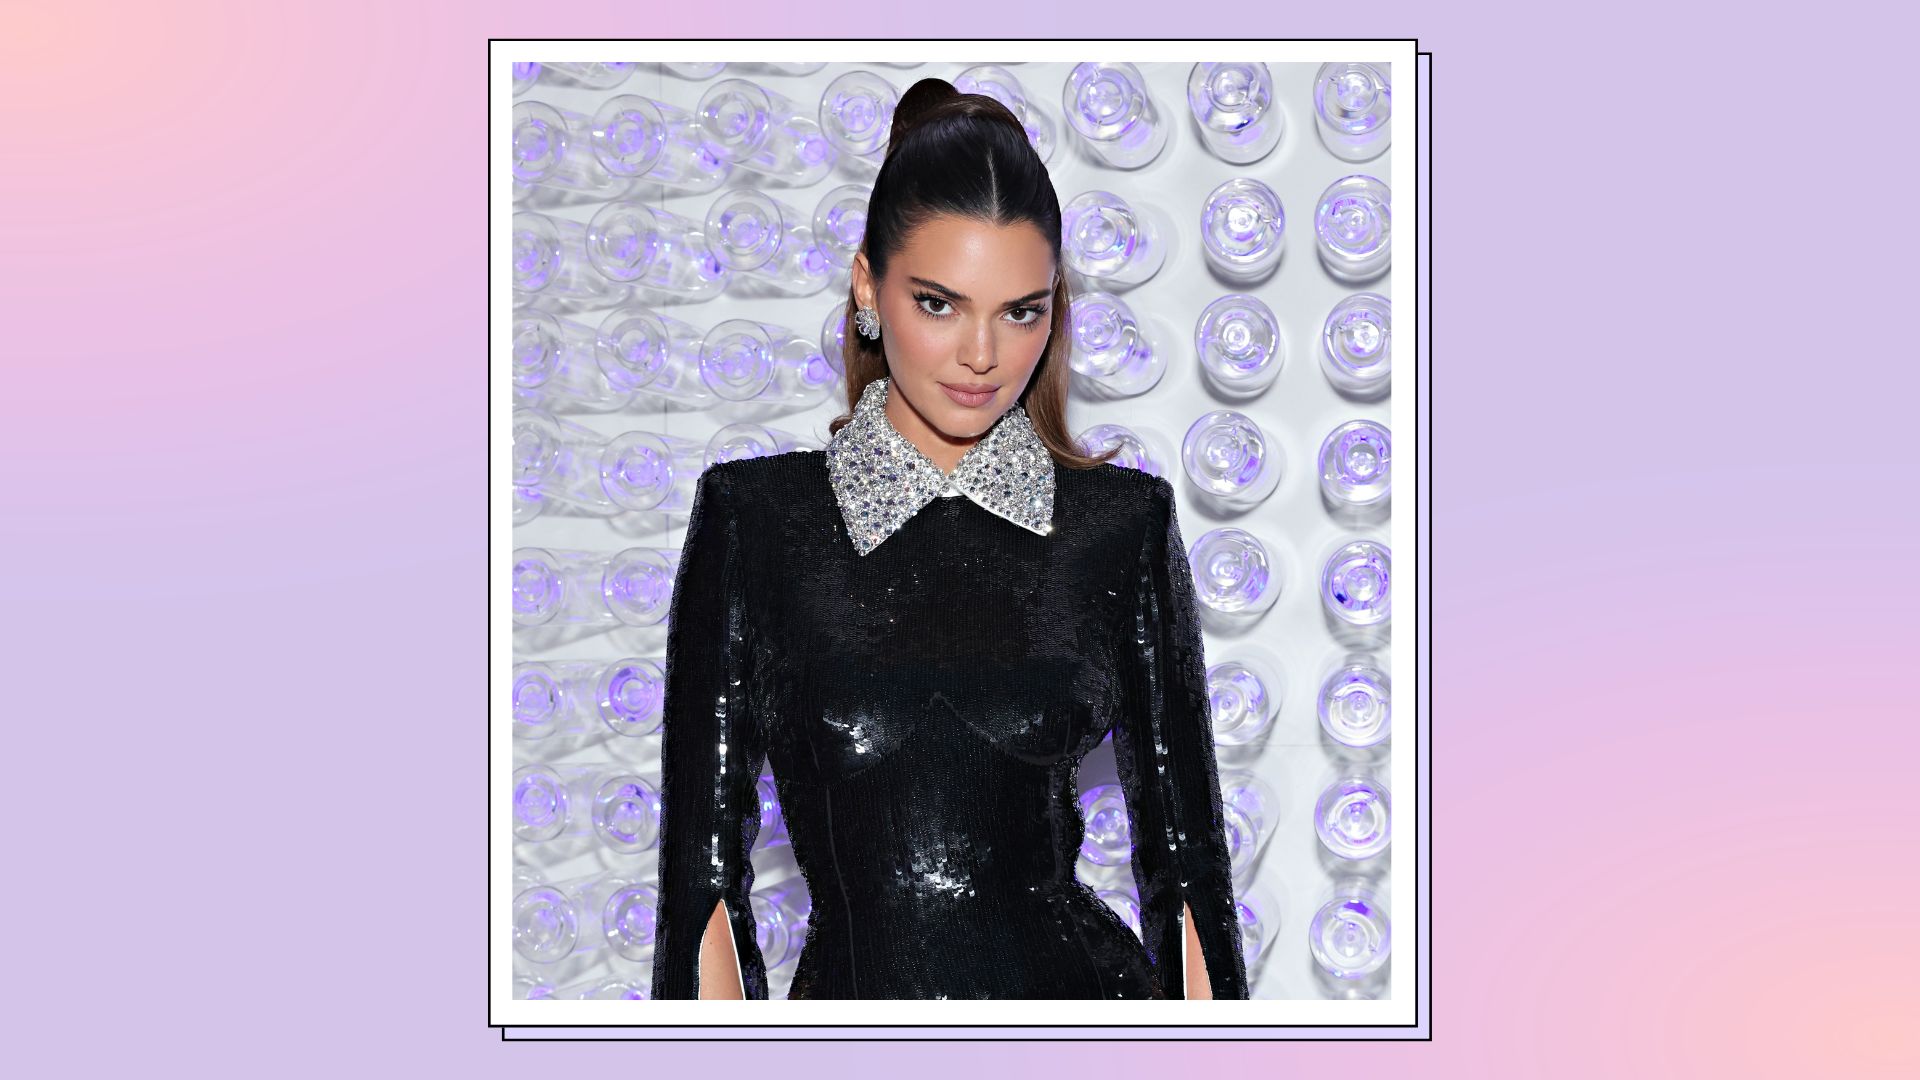 Kendall Jenner Wearing Sheer Outfits